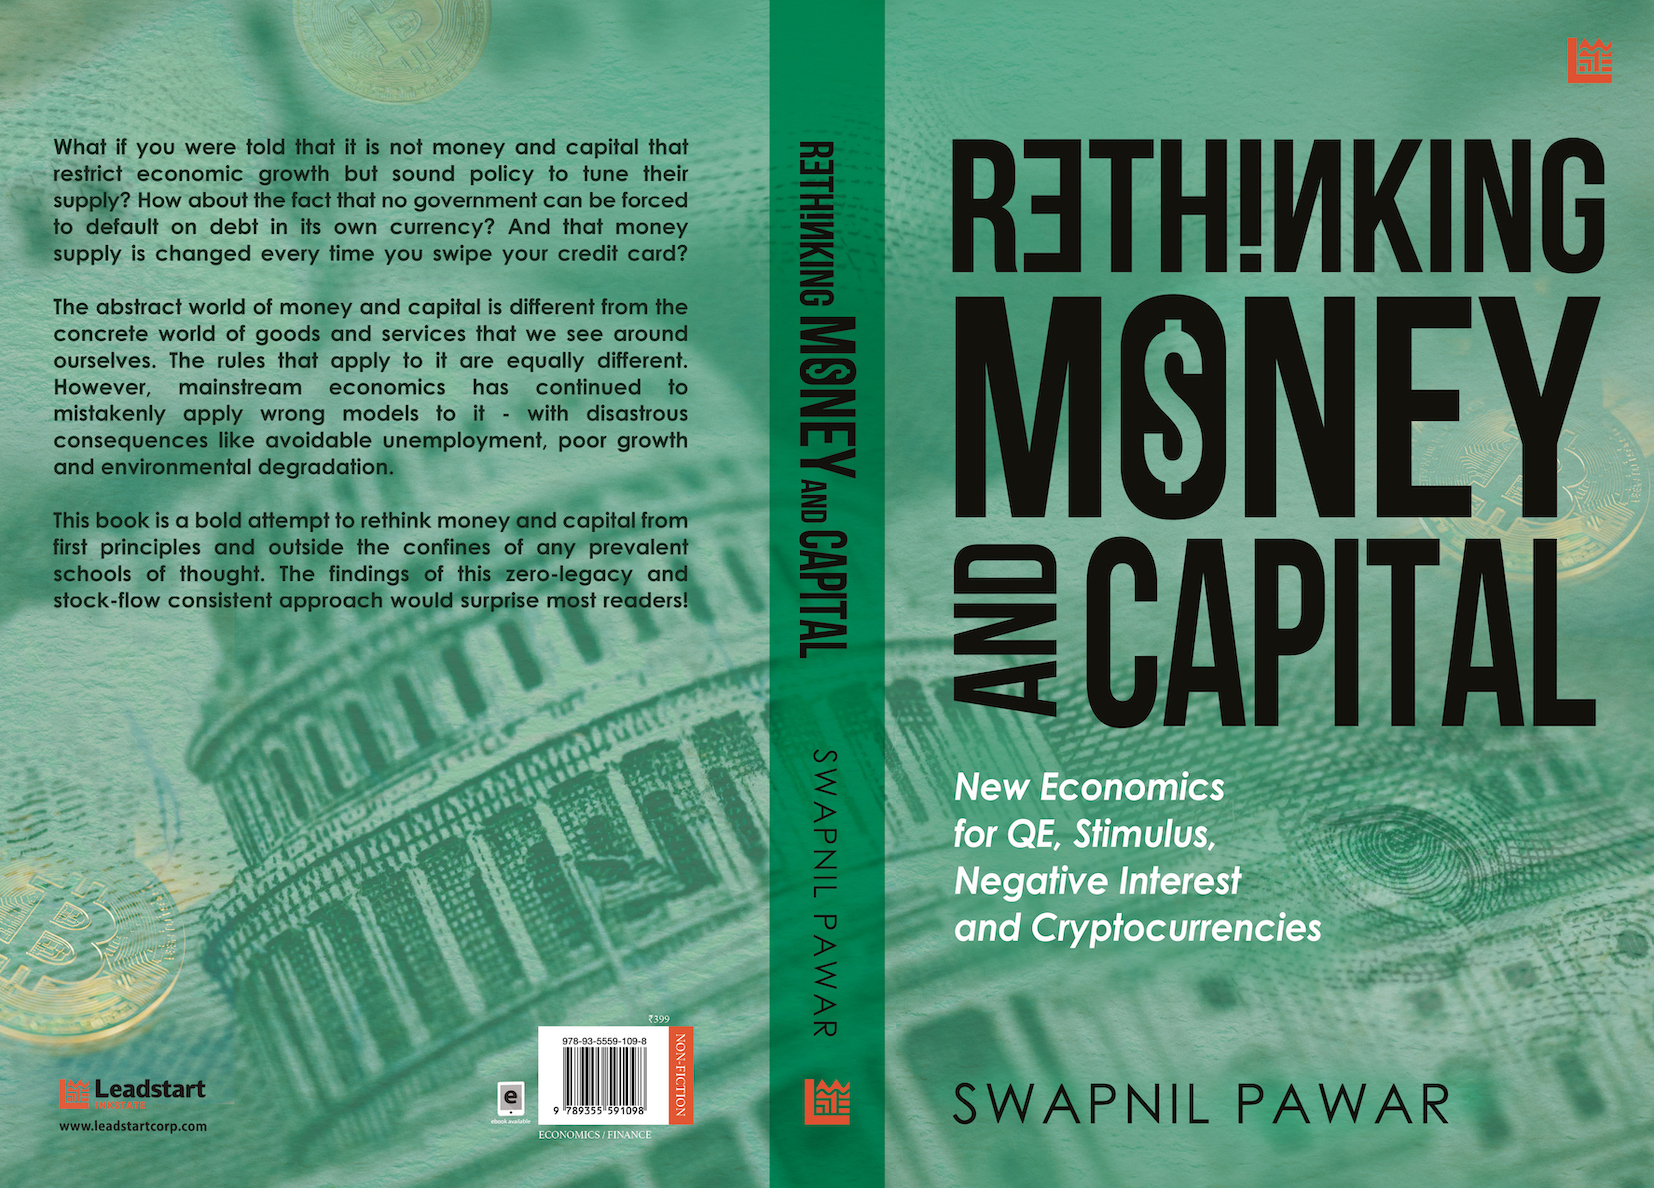 ‘Rethinking Money and Capital’ provides solutions for the present times